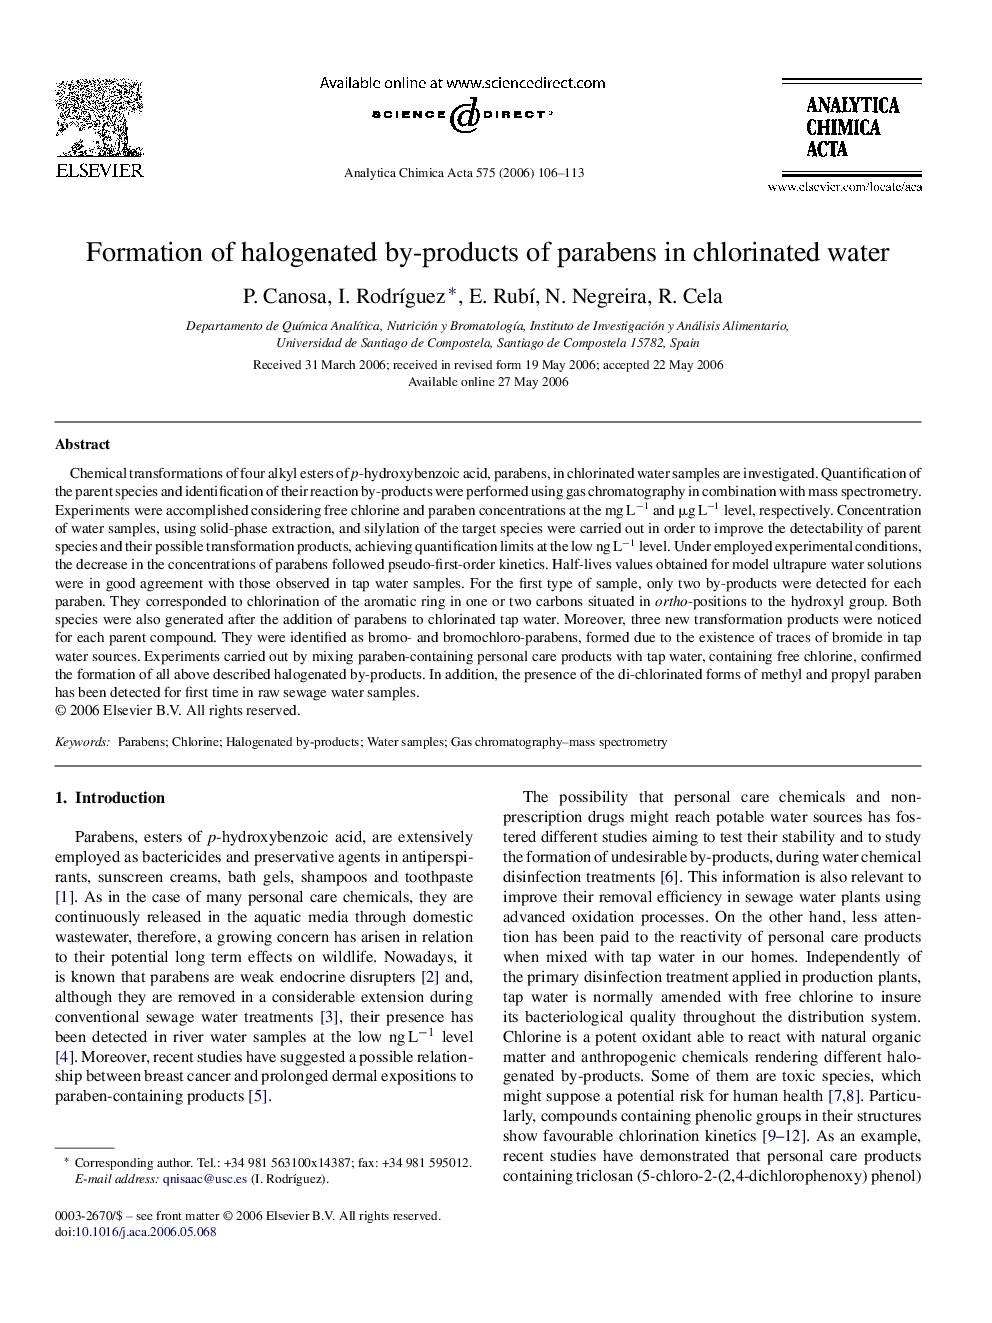 Formation of halogenated by-products of parabens in chlorinated water